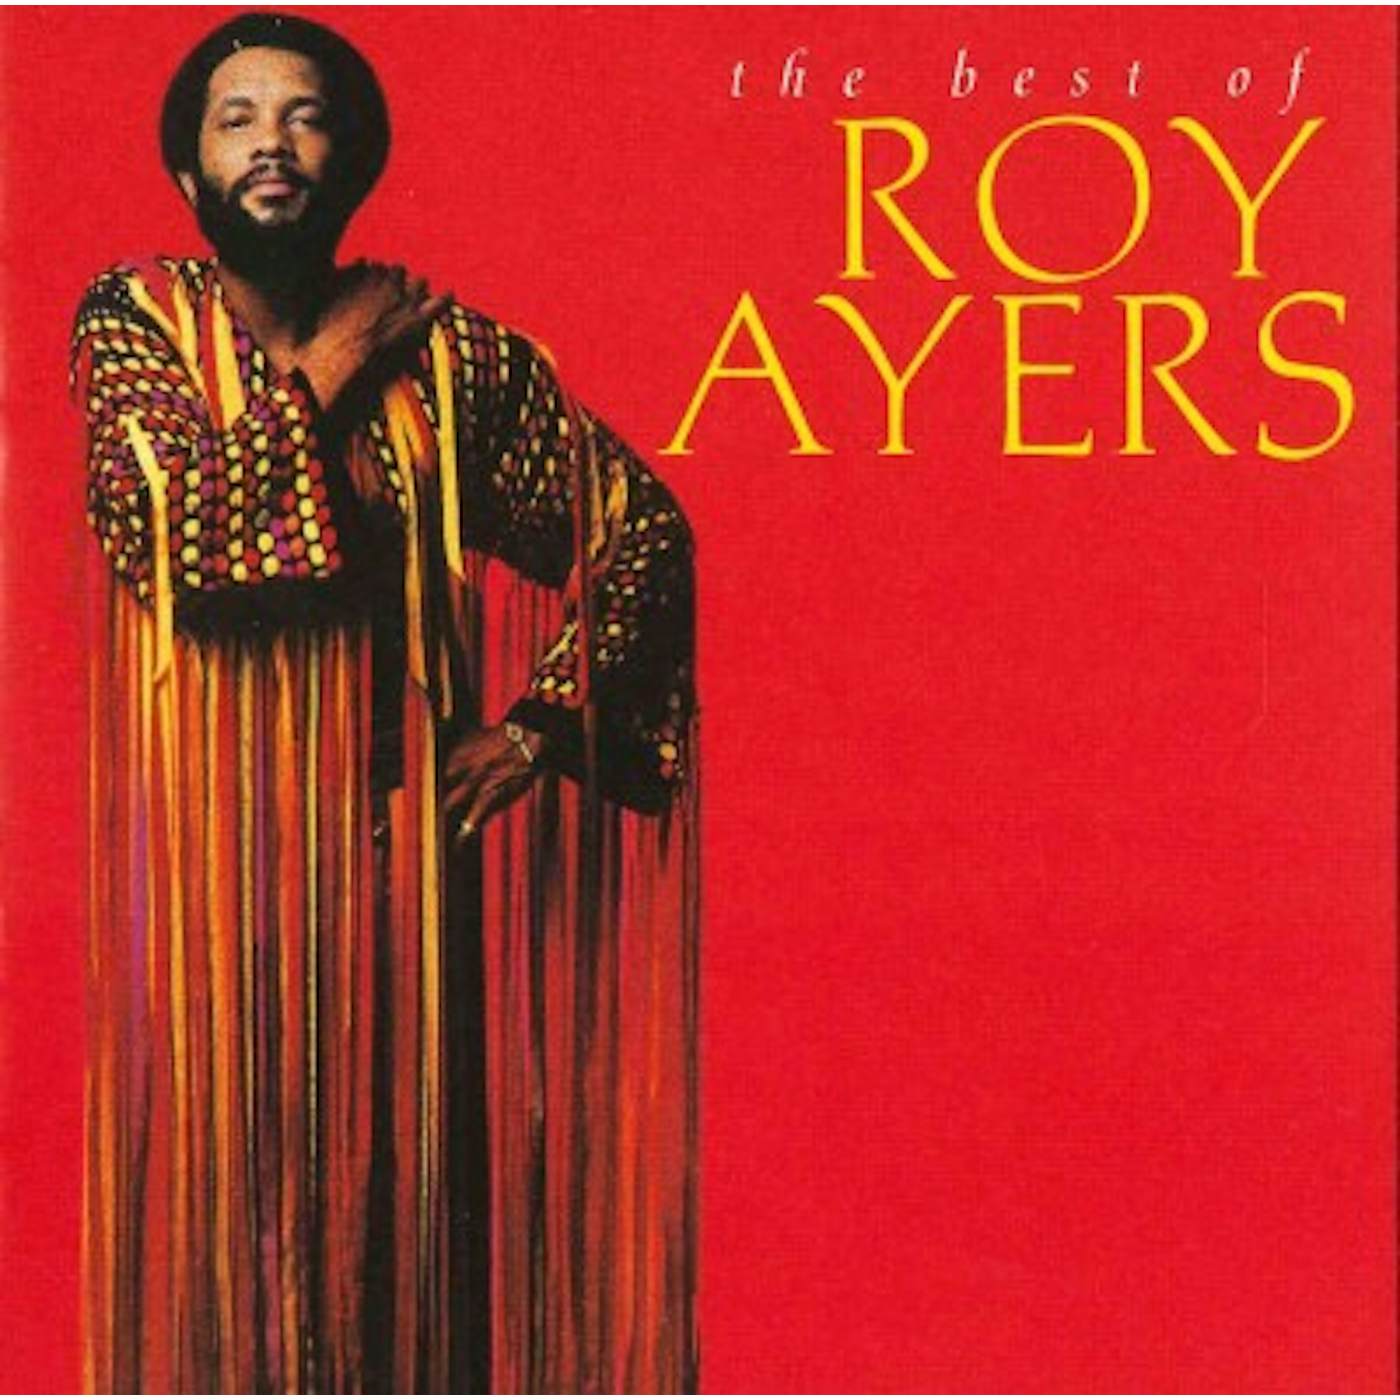 Roy Ayers SOUL ESSENTIALS SERIES: BEST OF CD